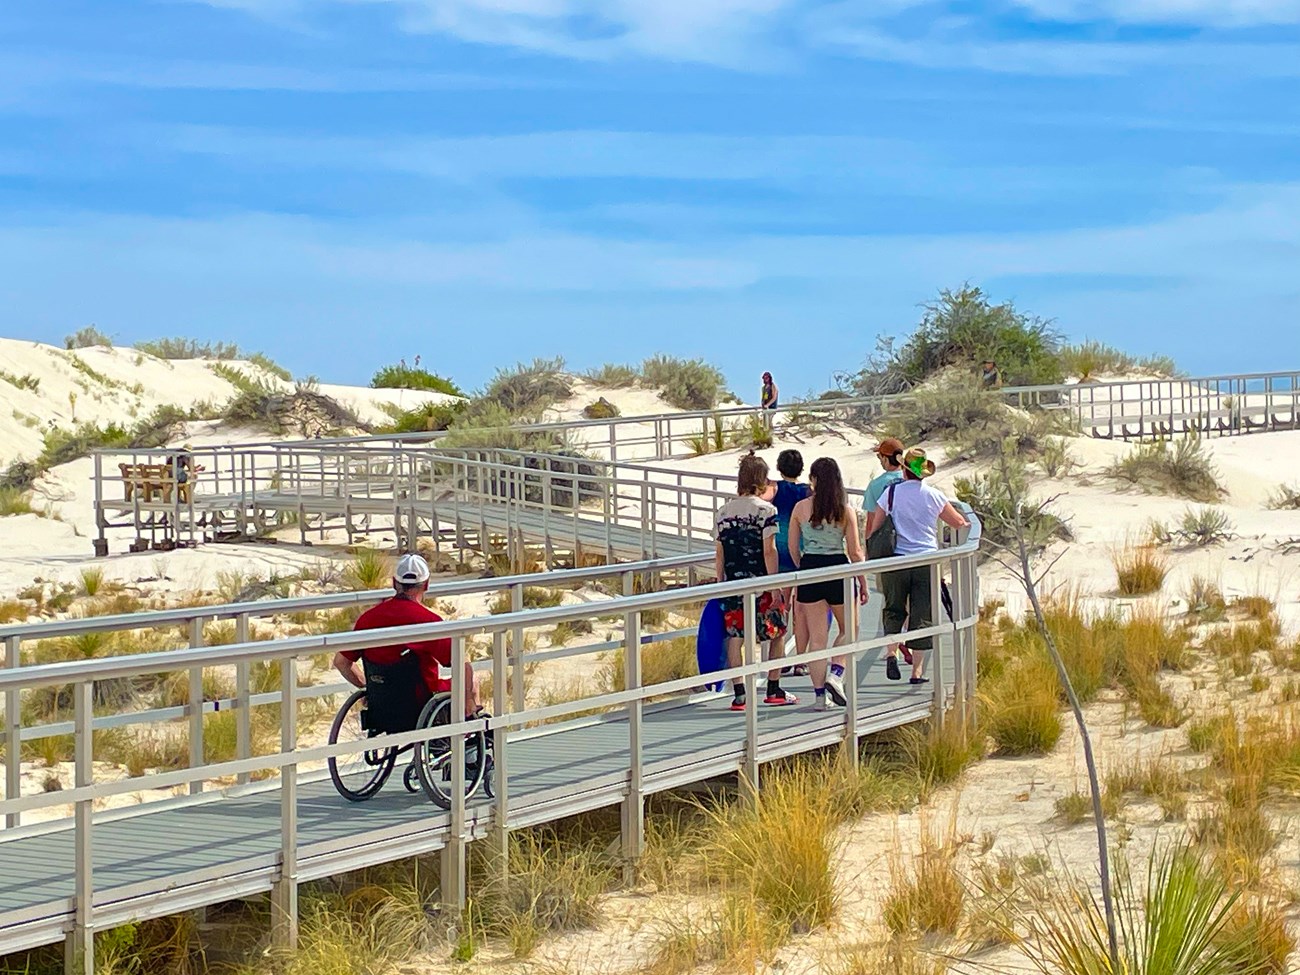 a man in a wheelchair follows a group of people along a raised boardwalk through a dune area covered in plants.